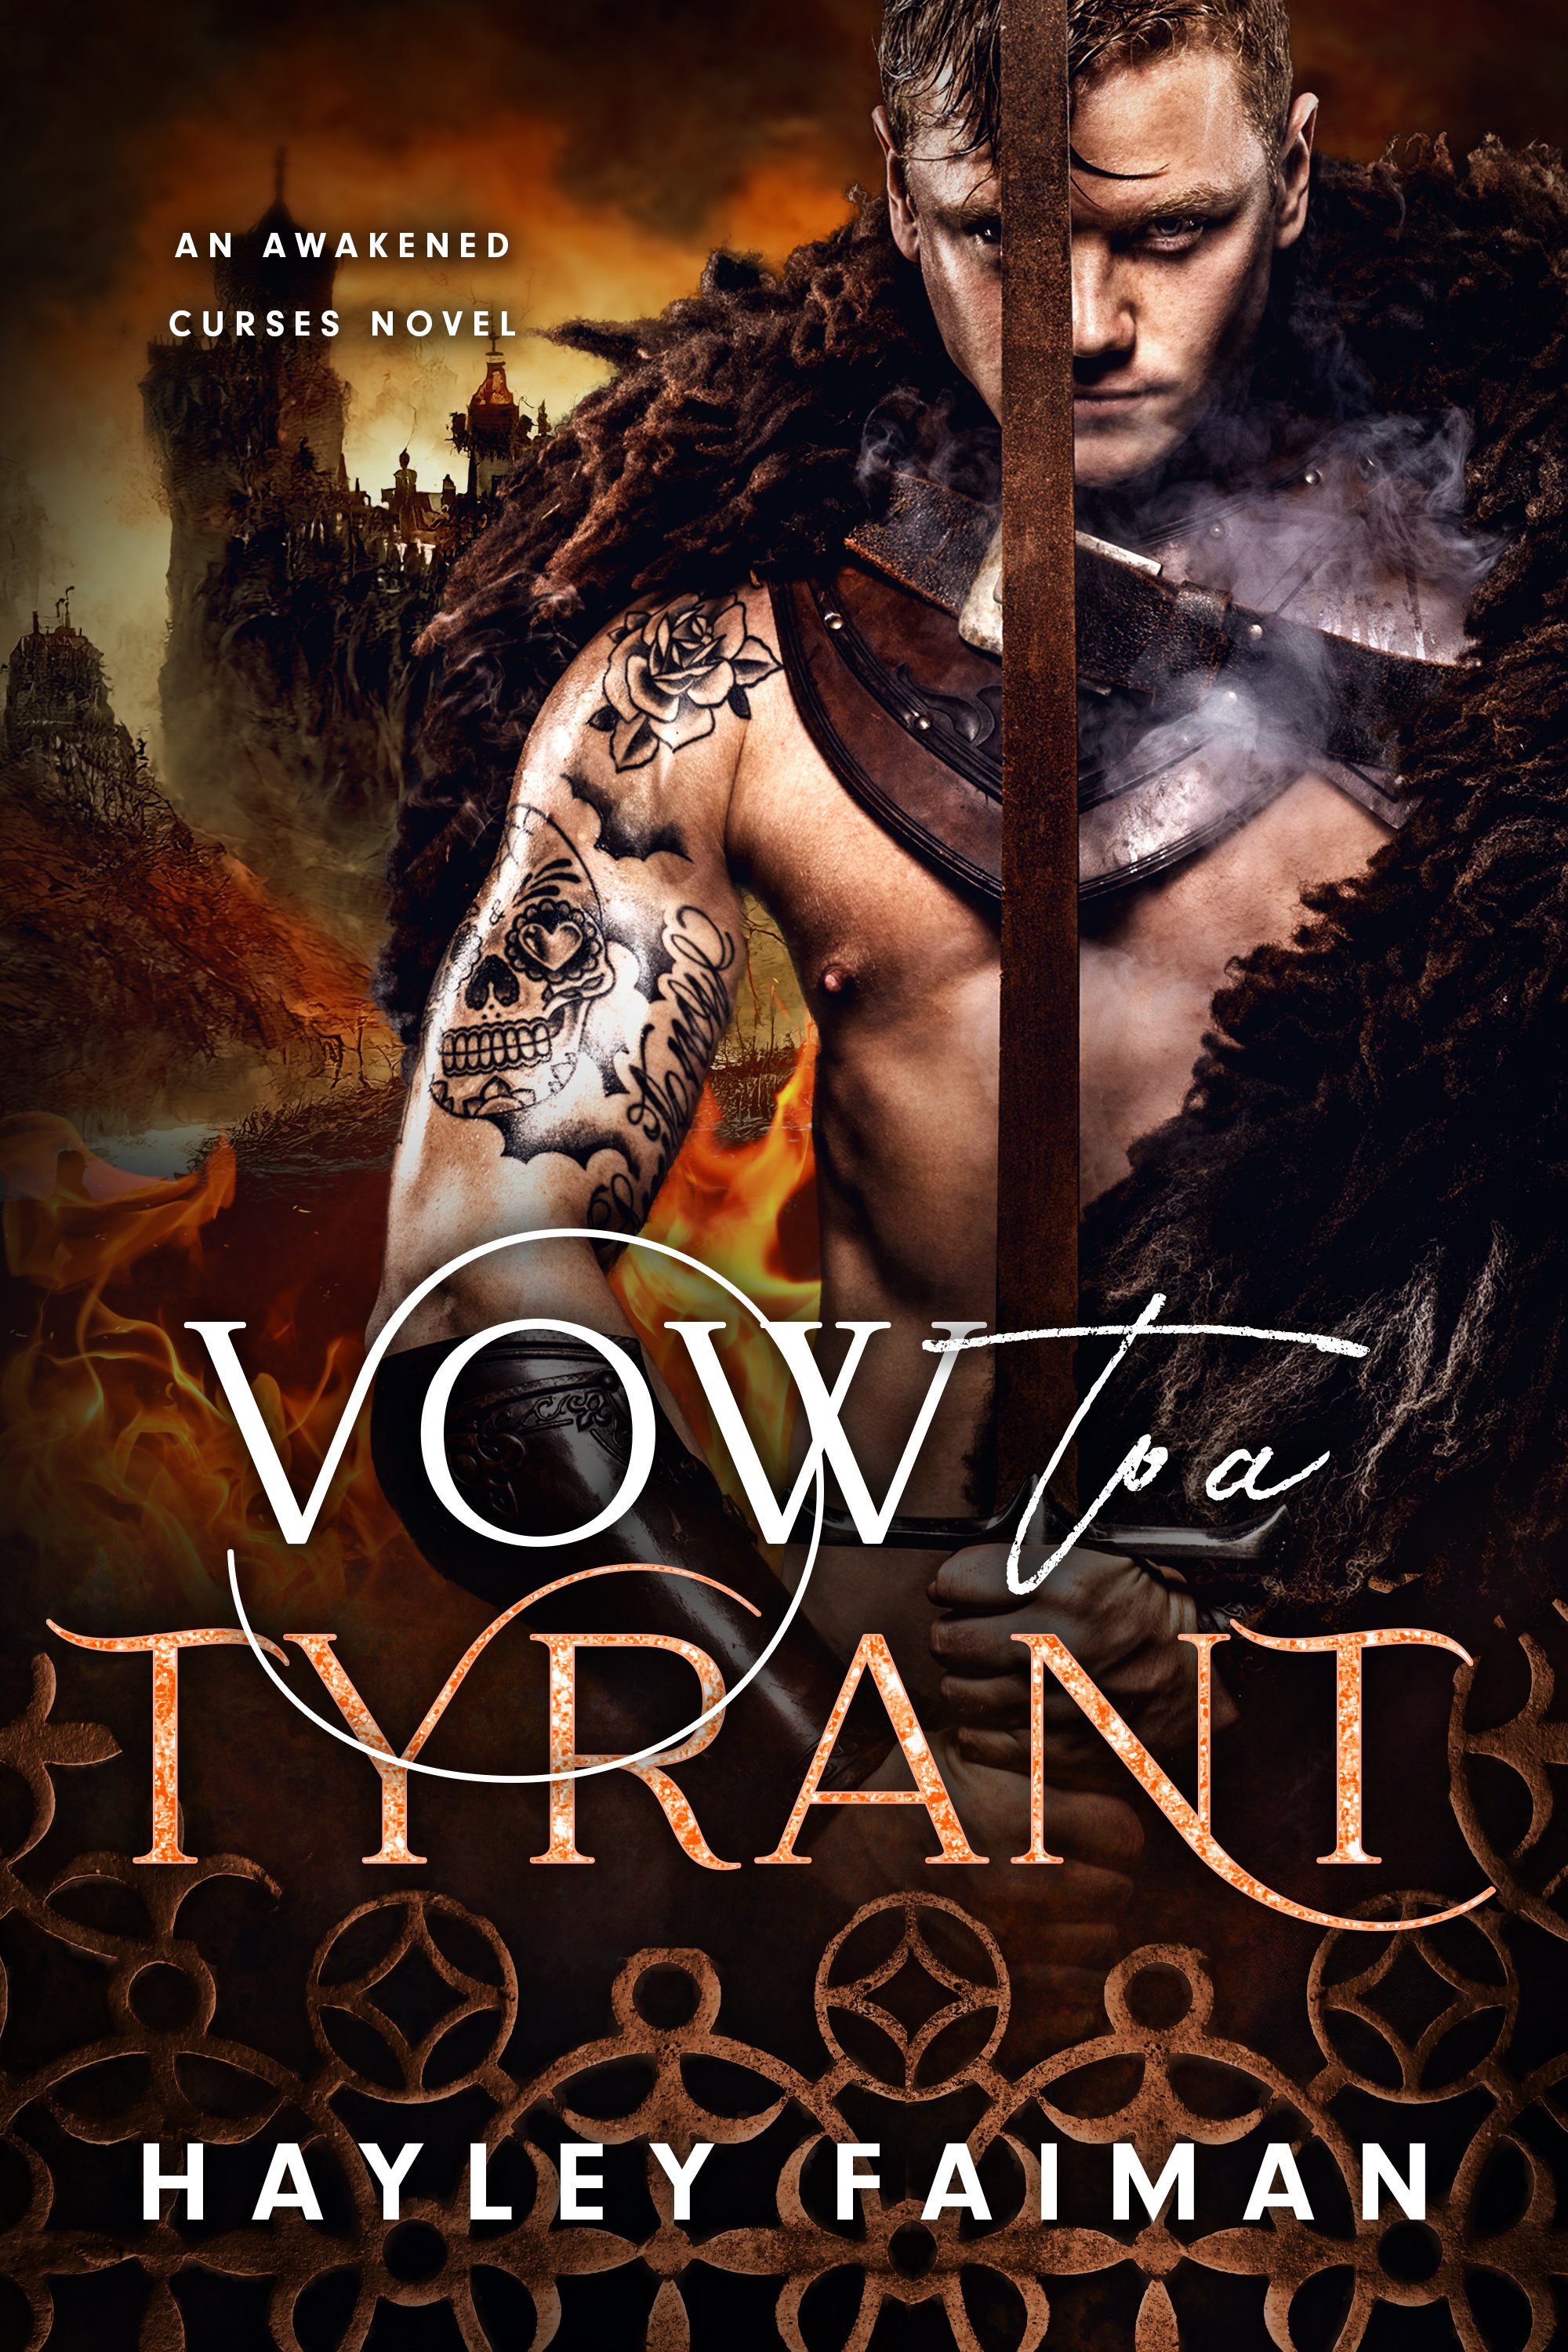 Vow to a Tyrant